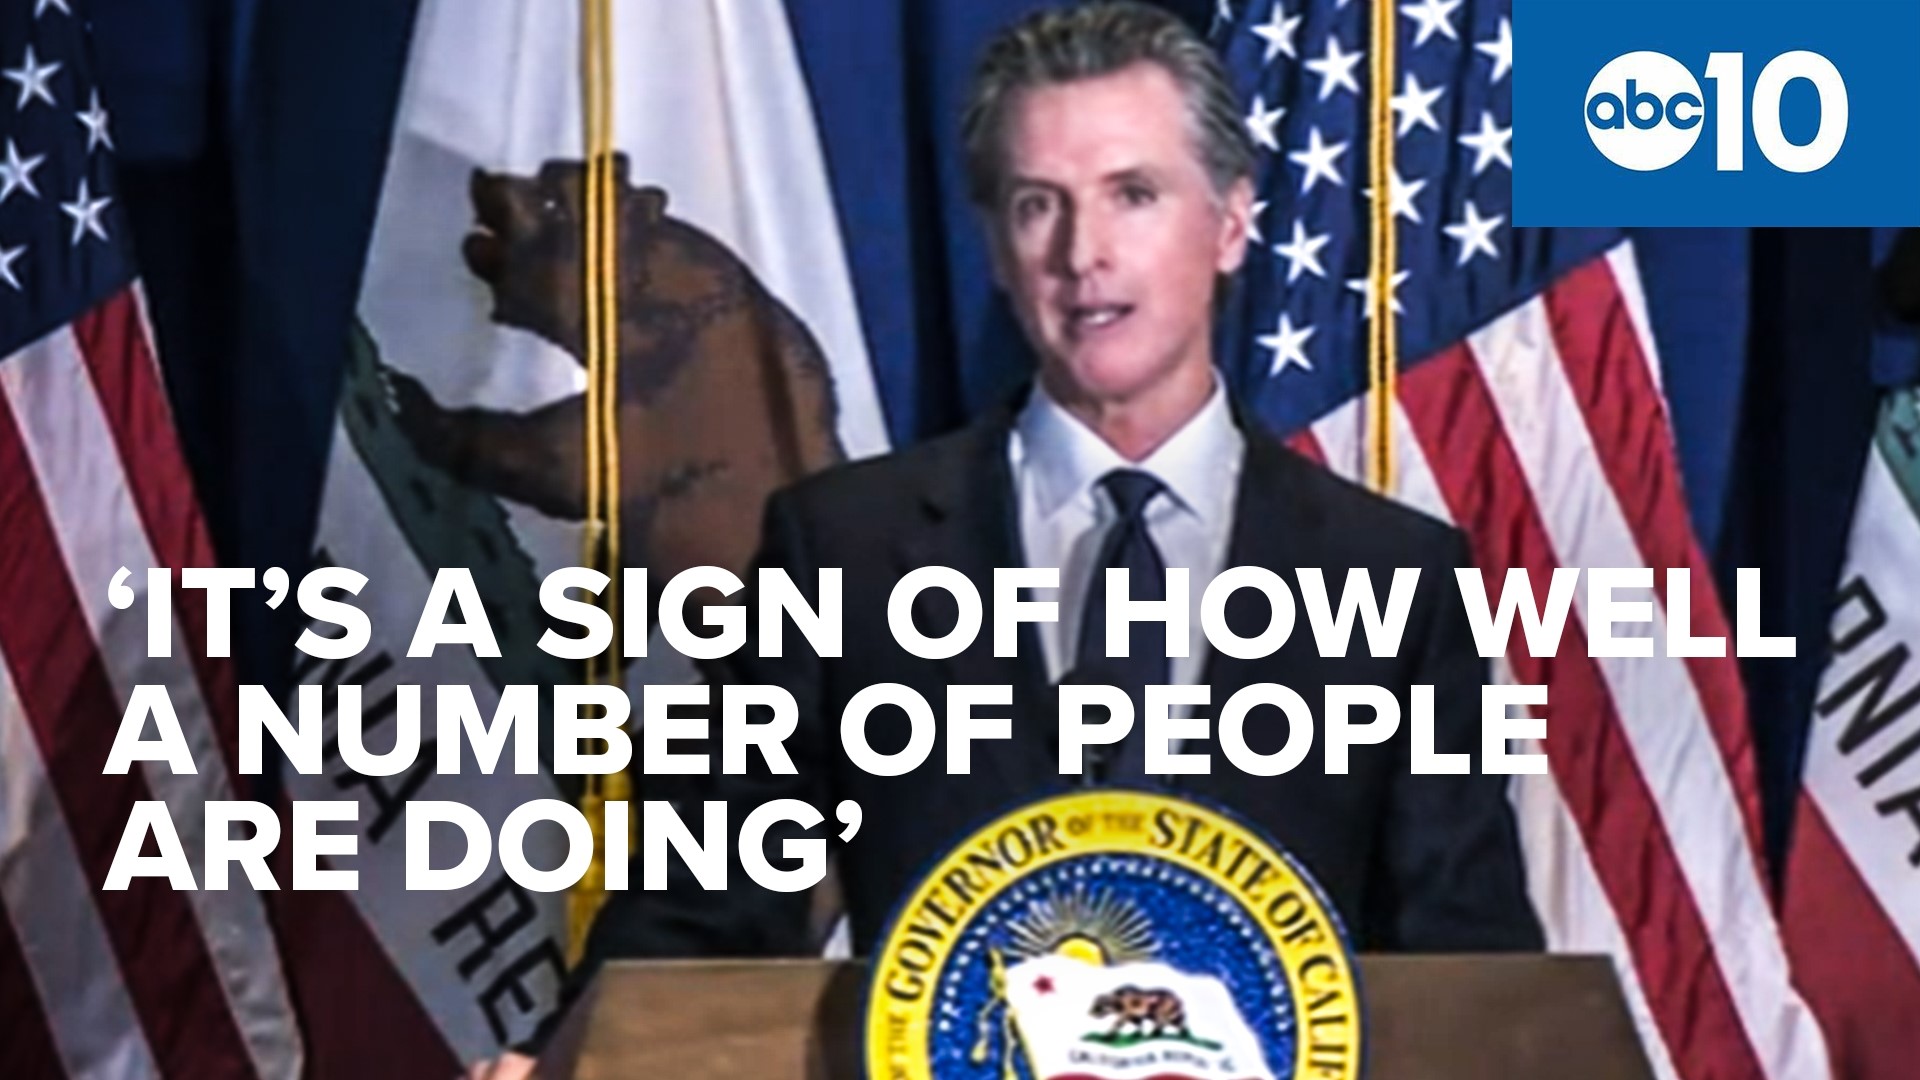 Gov. Gavin Newsom said he doesn't believe California residents are being taxed too much, and that high taxes are not driving people out of the state.